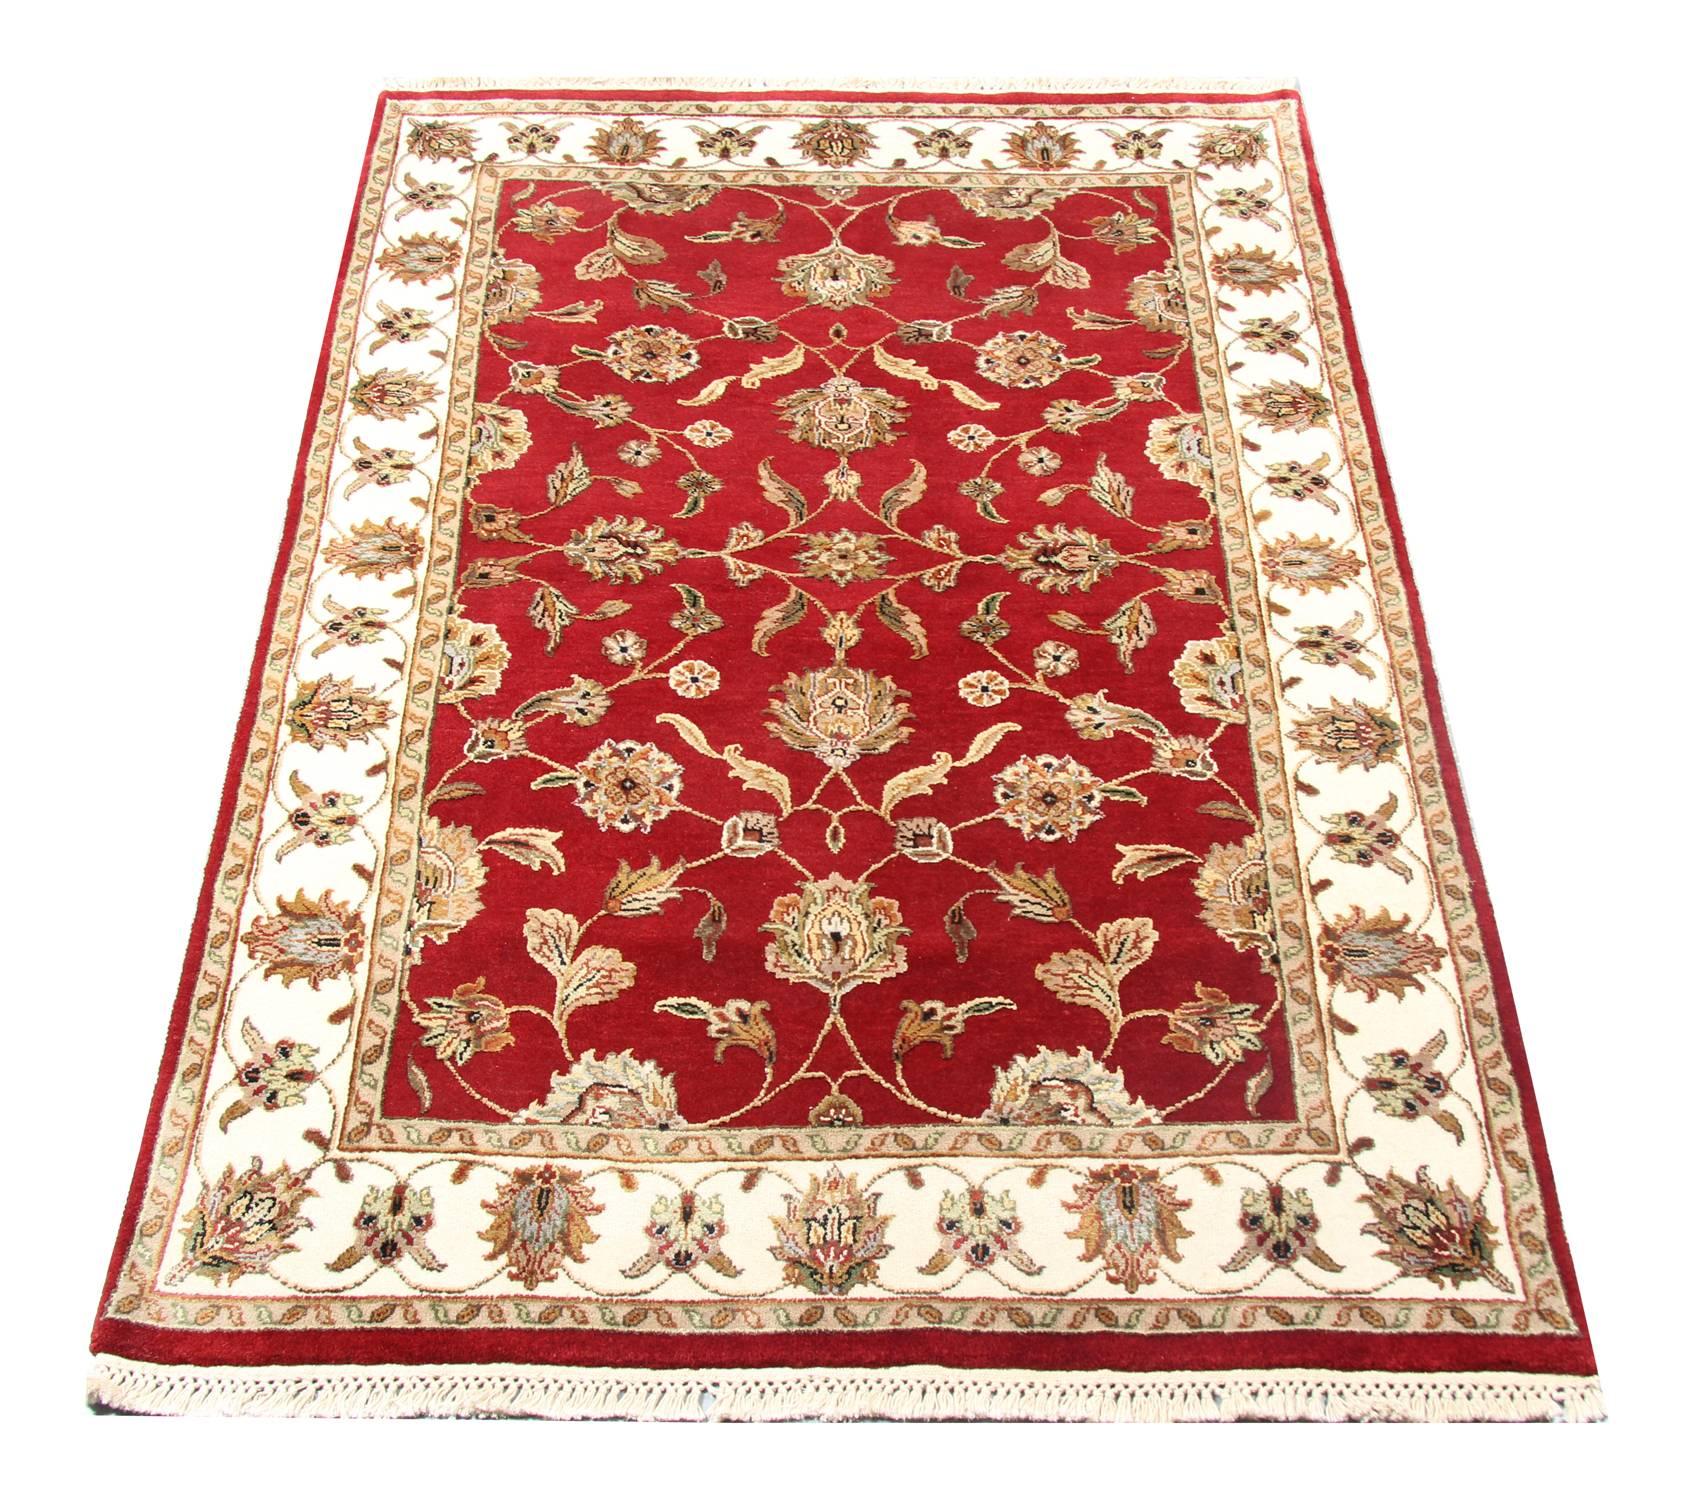 This elegant handmade wool rug was woven by master weavers on looms in Afghanistan. The central design features a rich red background with beige, cream and gold accent colors that make up the symmetrical, floral design. Intricately woven with